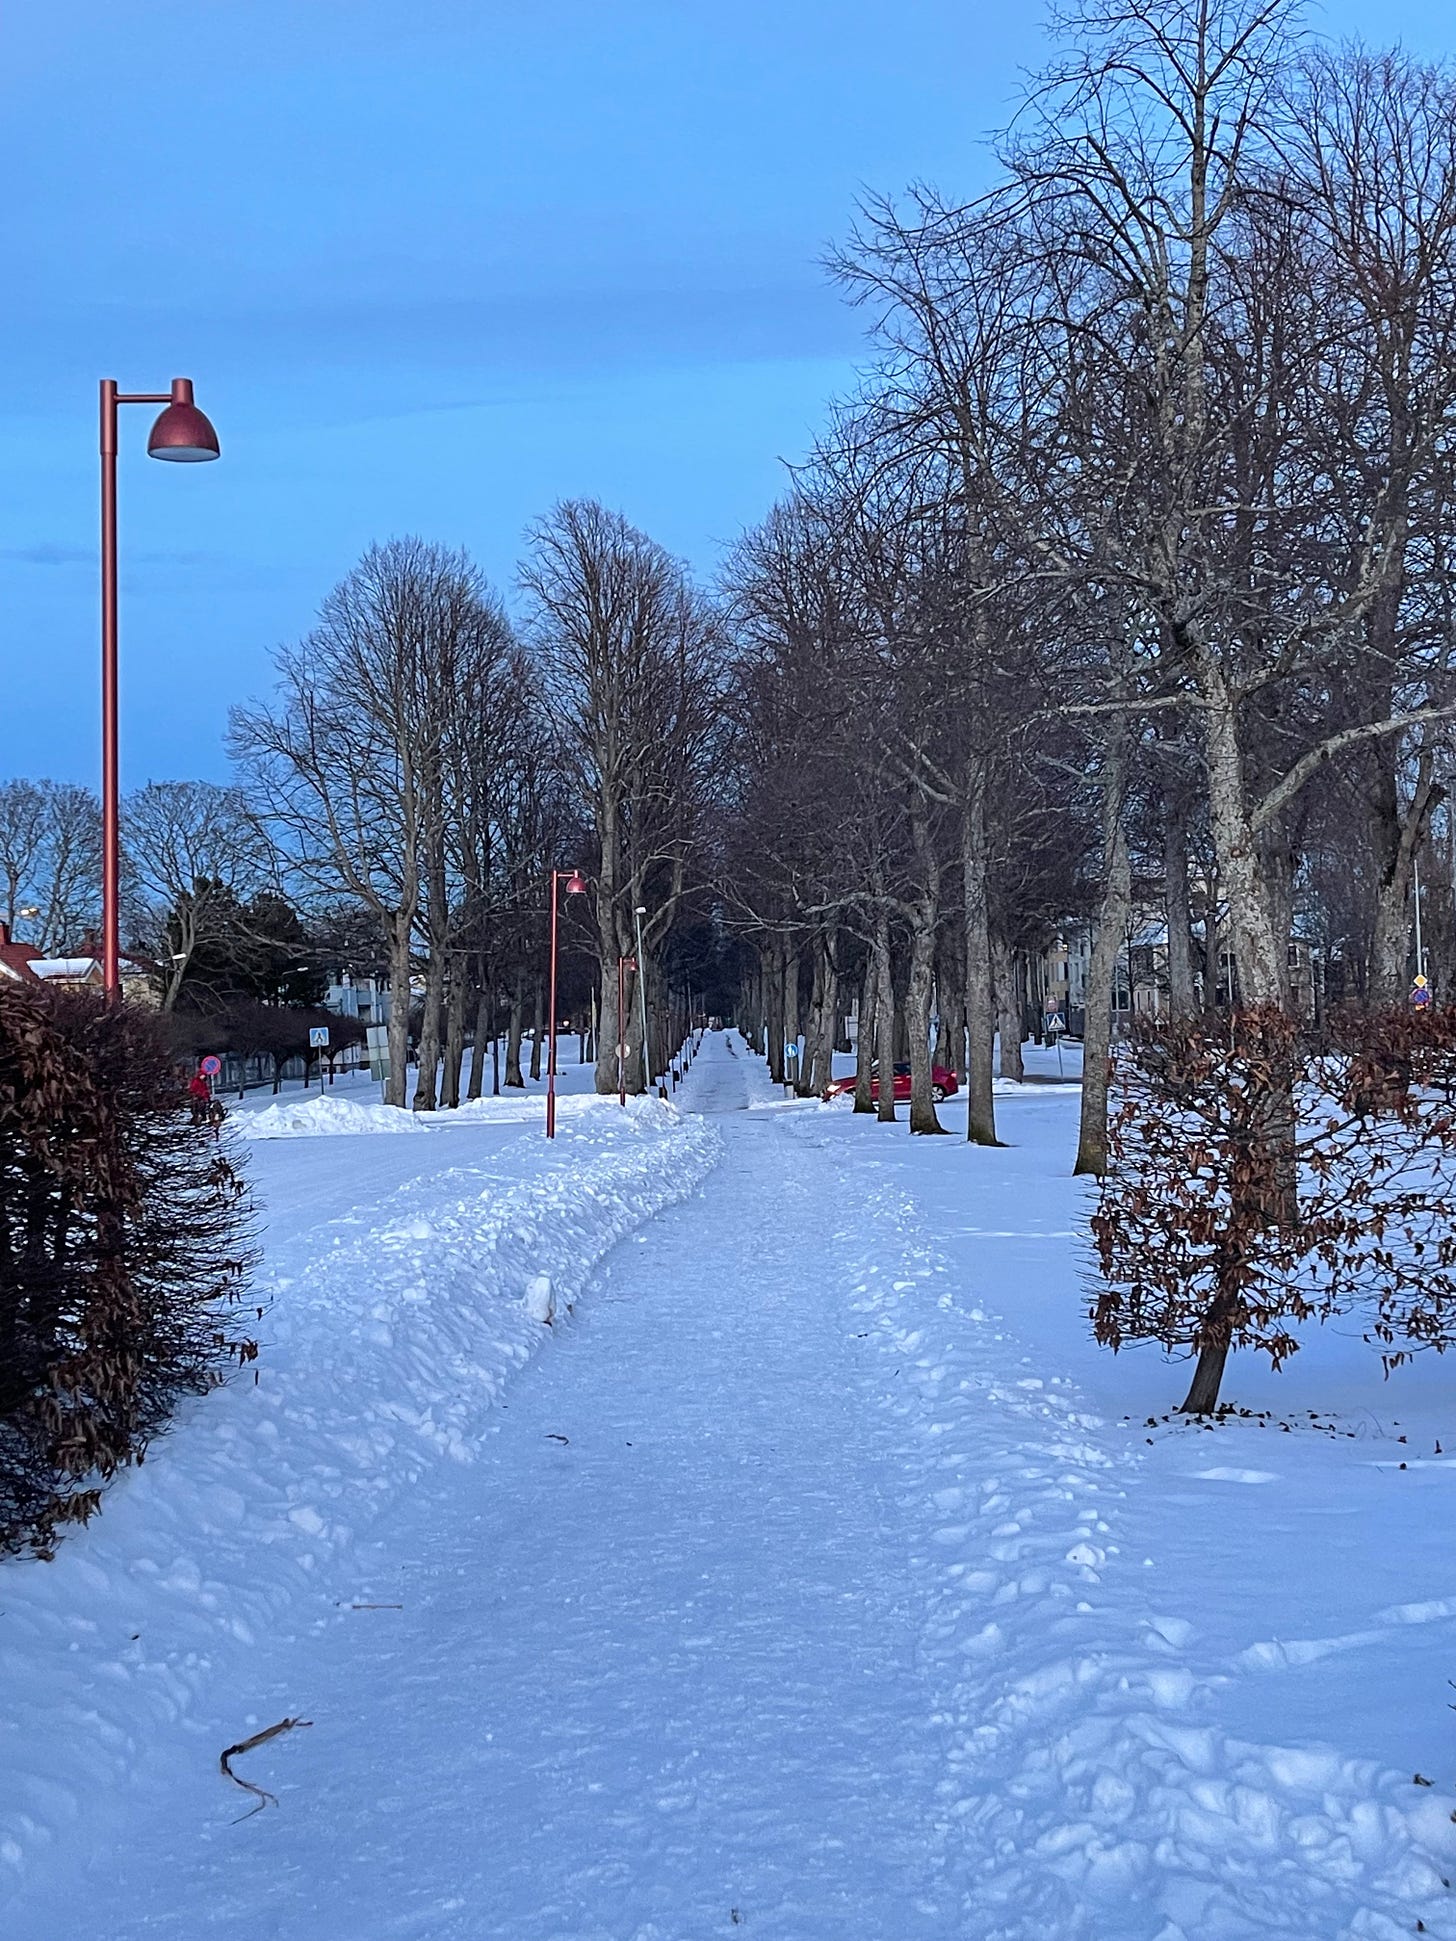 A long snow covered path through rows of tall, linden trees lining a wide esplanade. A red lamp post in the foreground on the left 